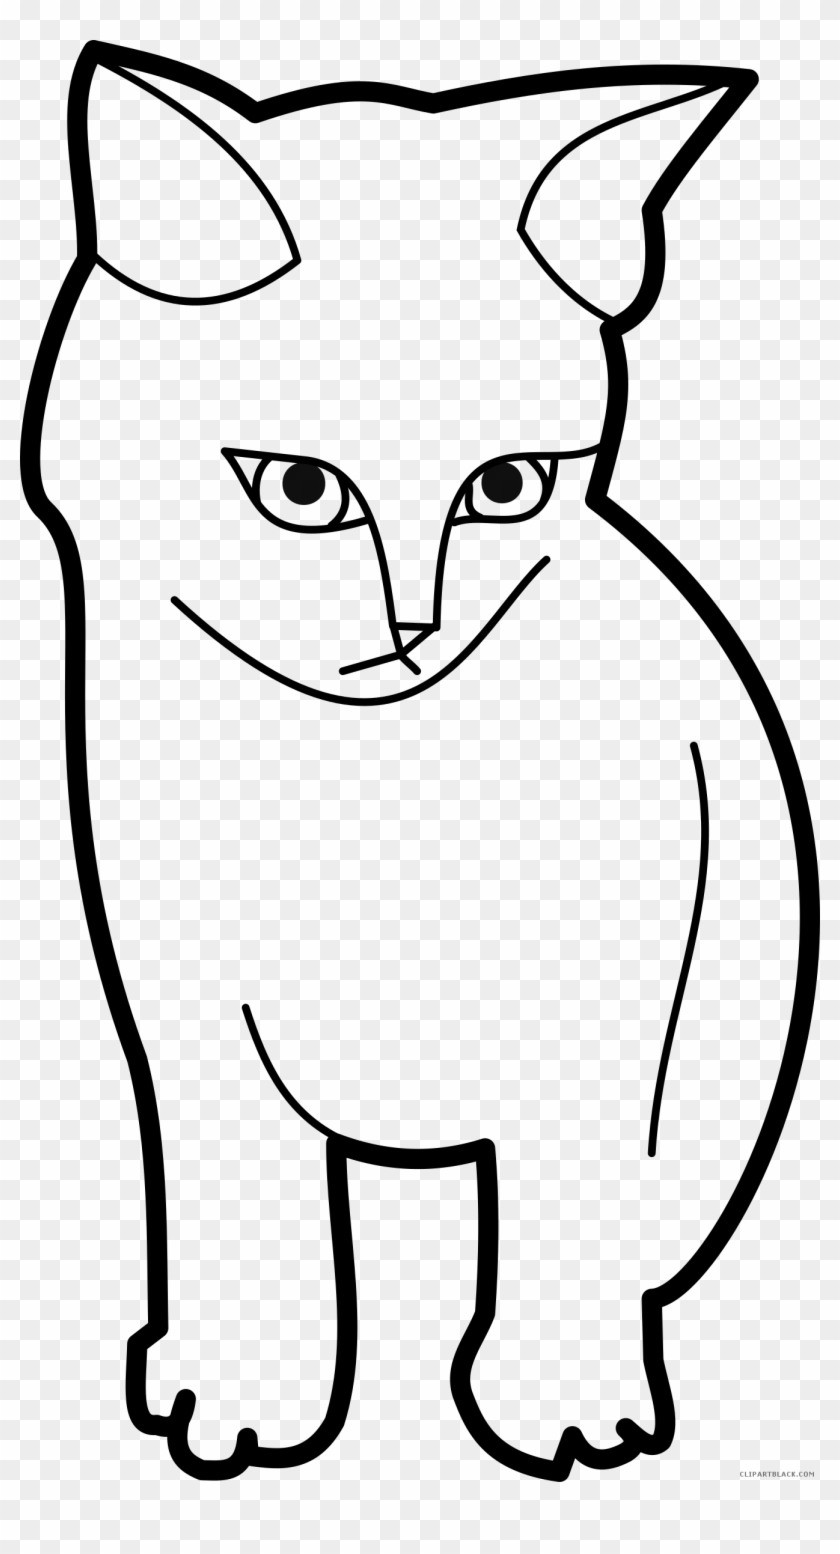 Cat Outline Animal Free Black White Clipart Images - Outline Image Of Cat #1001817